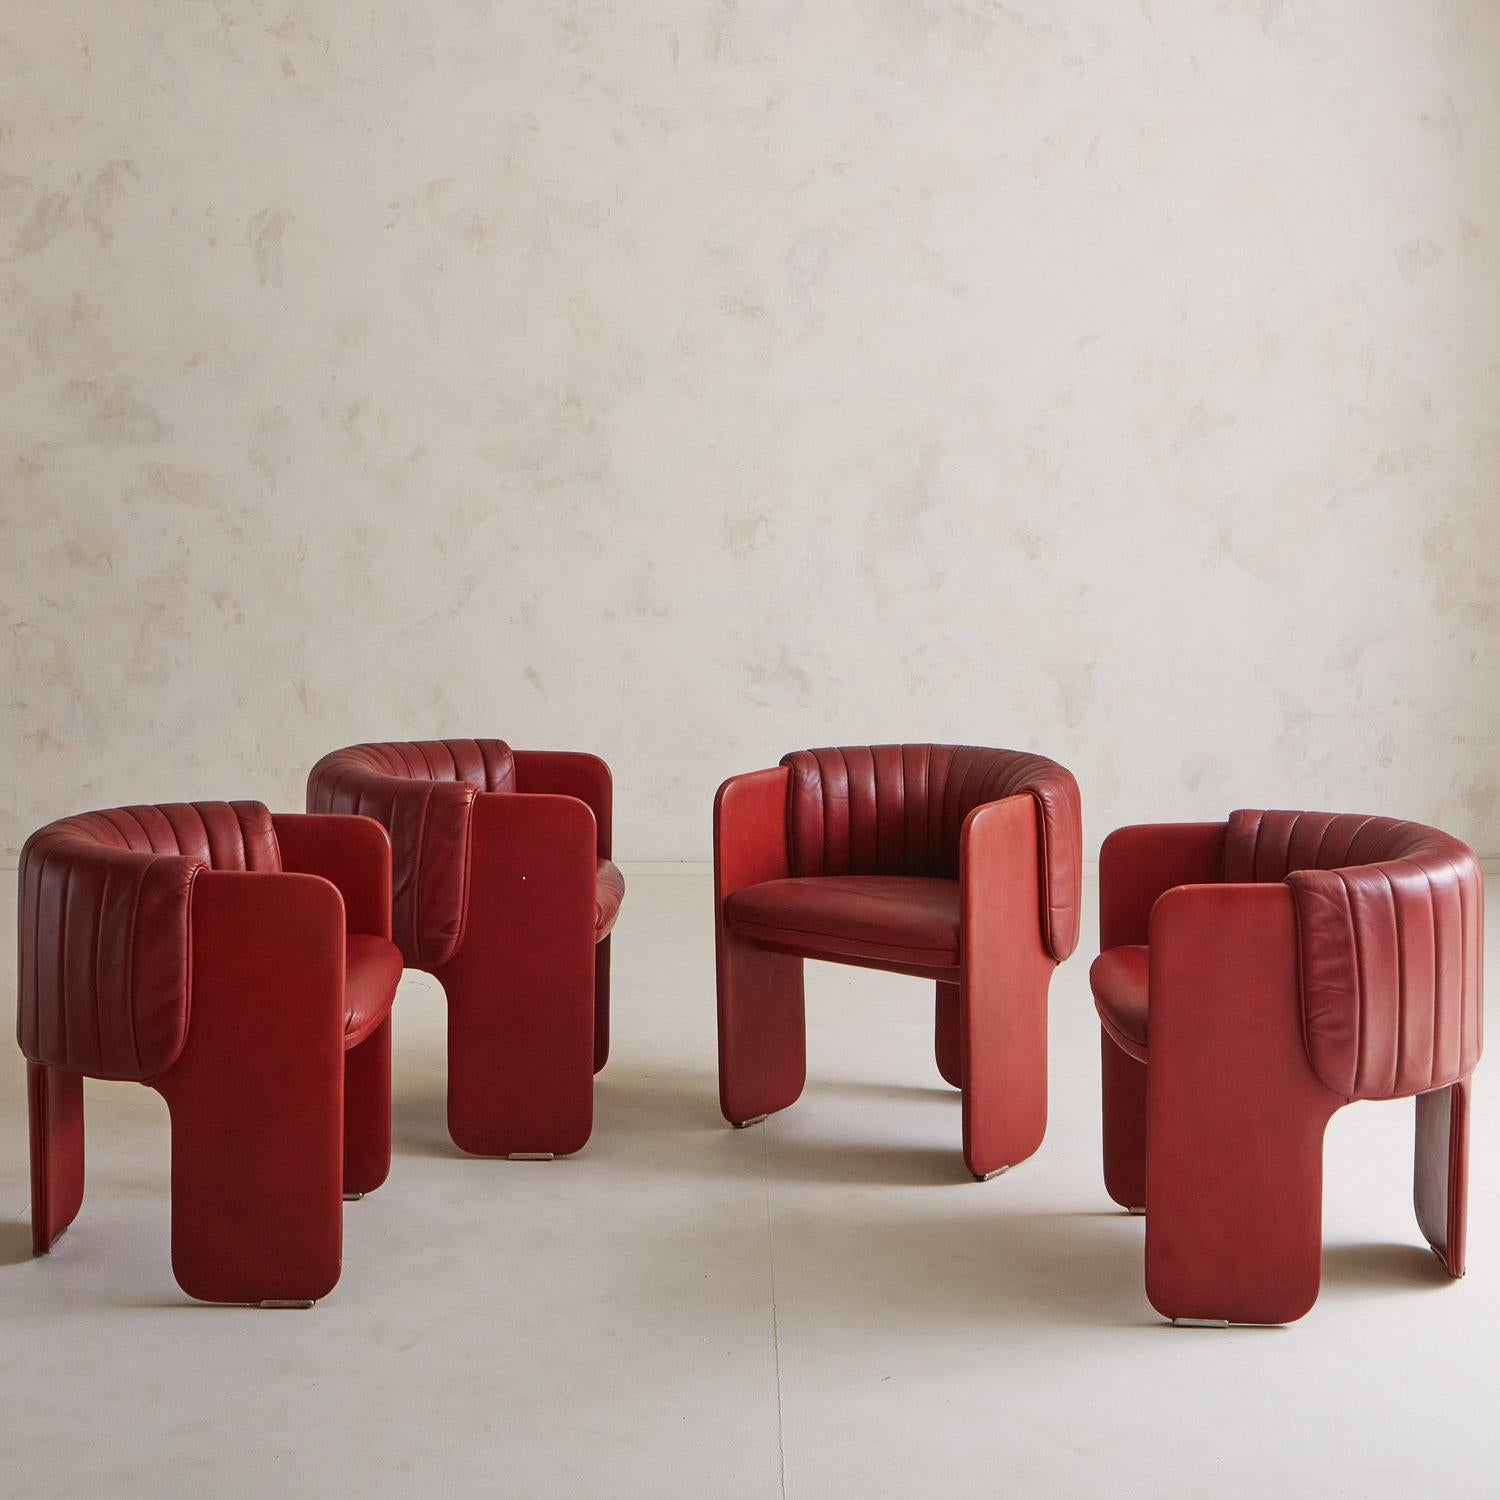 Modern Set of 4 Red Vegan Leather Chairs by Luigi Massoni for Poltrona Frau, Italy 1980